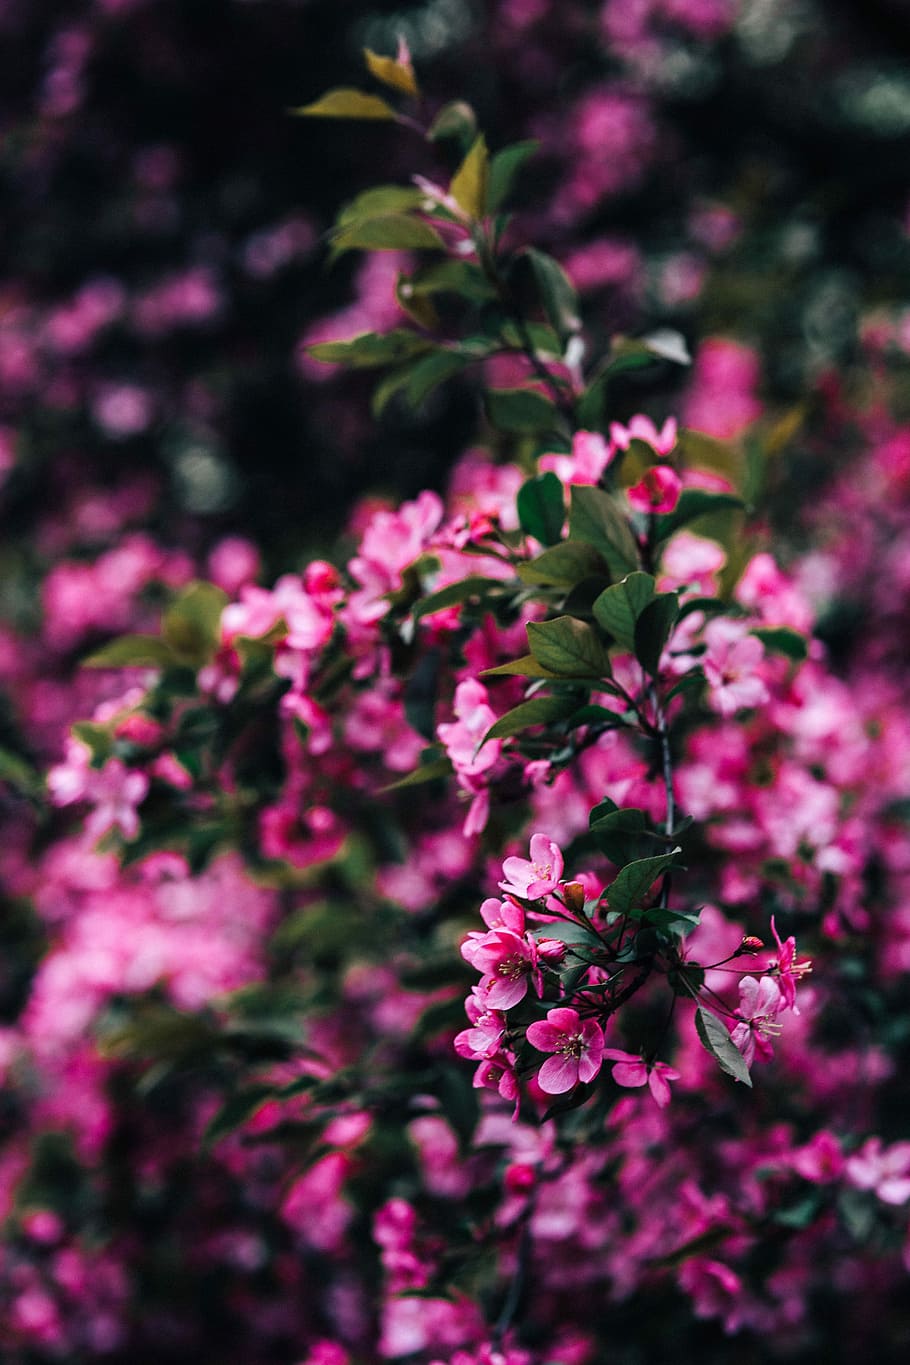 Lovely pink flowers blooming from the tree branches, copy space